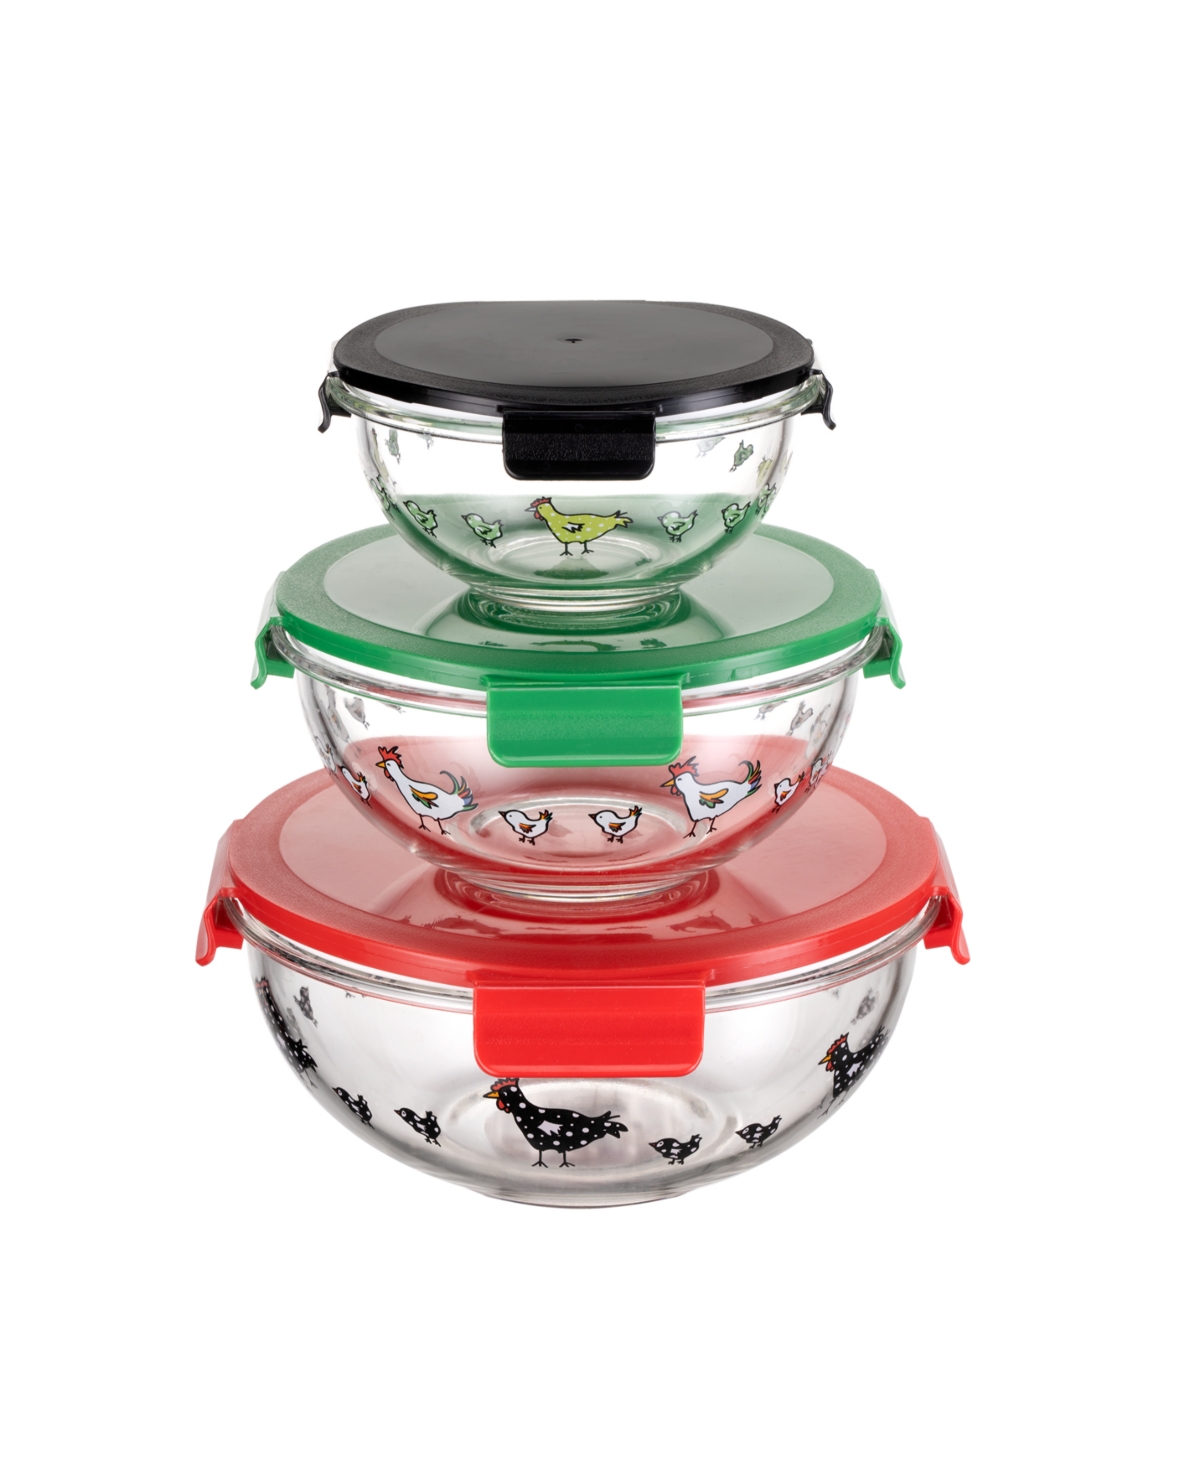 Genicook 3 Pc Round Container Borosilicate Glass Nesting Salad And Mixing Bowl Set With Snap-on Lids In Multicolor